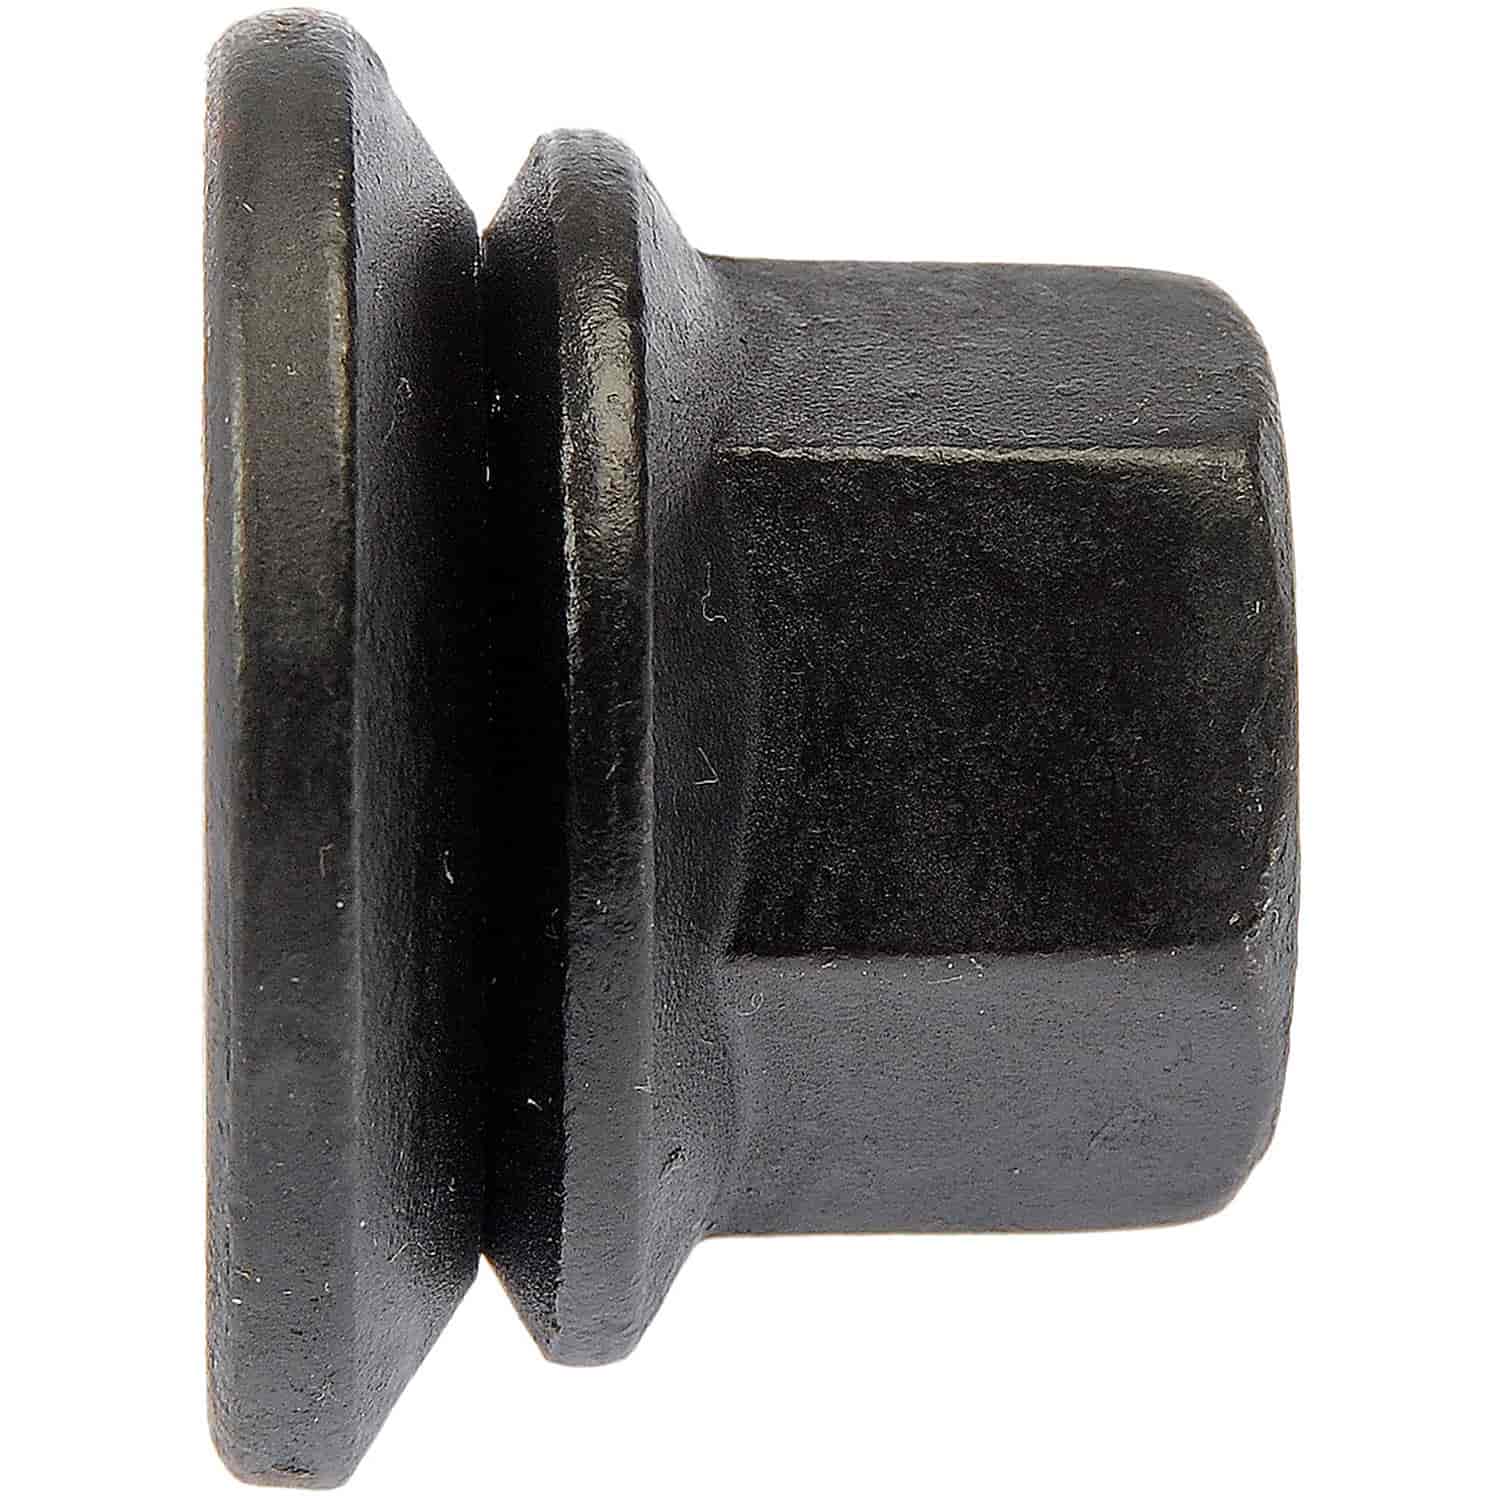 Wheel Nut 9/16-18 Flanged Flat Face - 15/16 Hex 1-1/8 Length